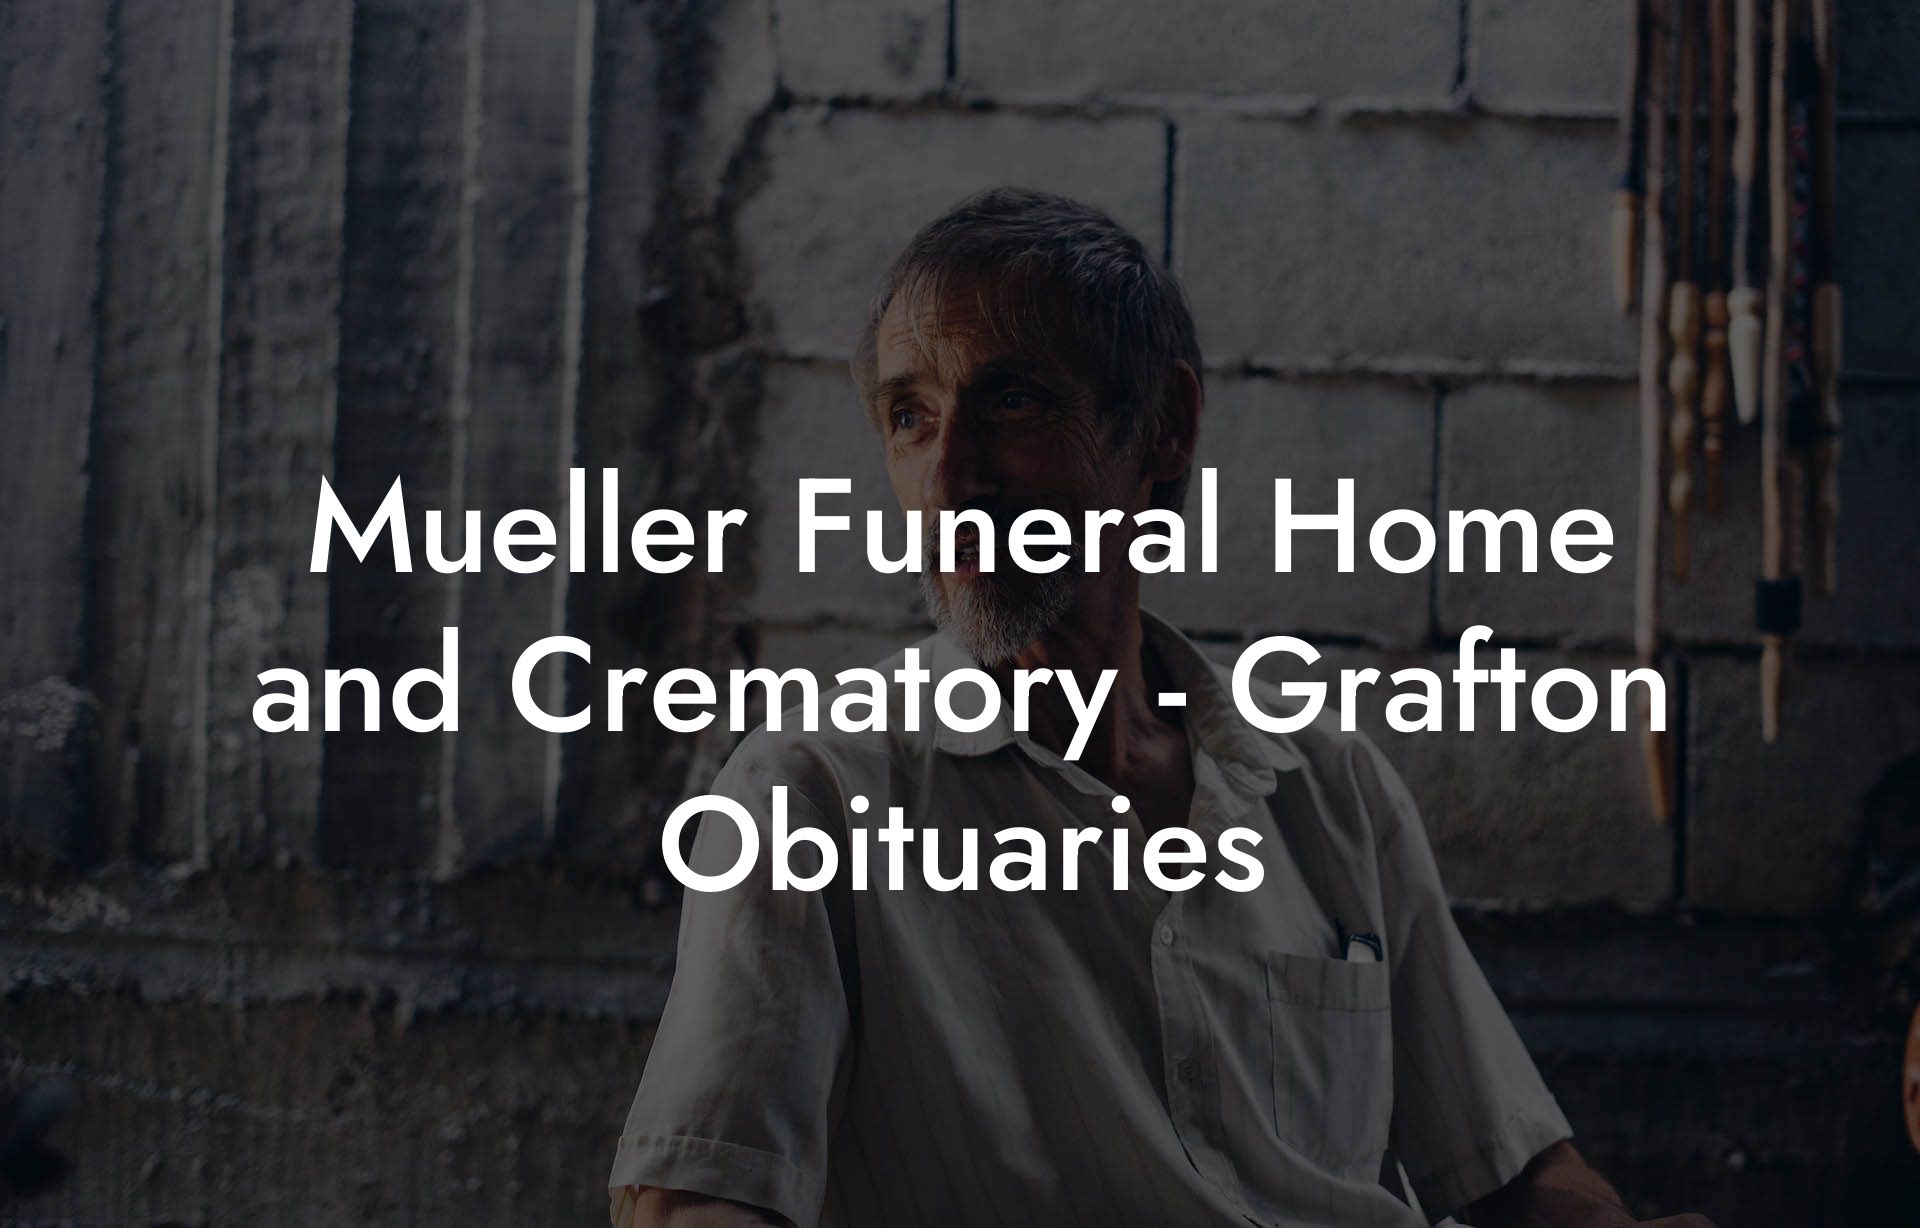 Mueller Funeral Home and Crematory - Grafton Obituaries